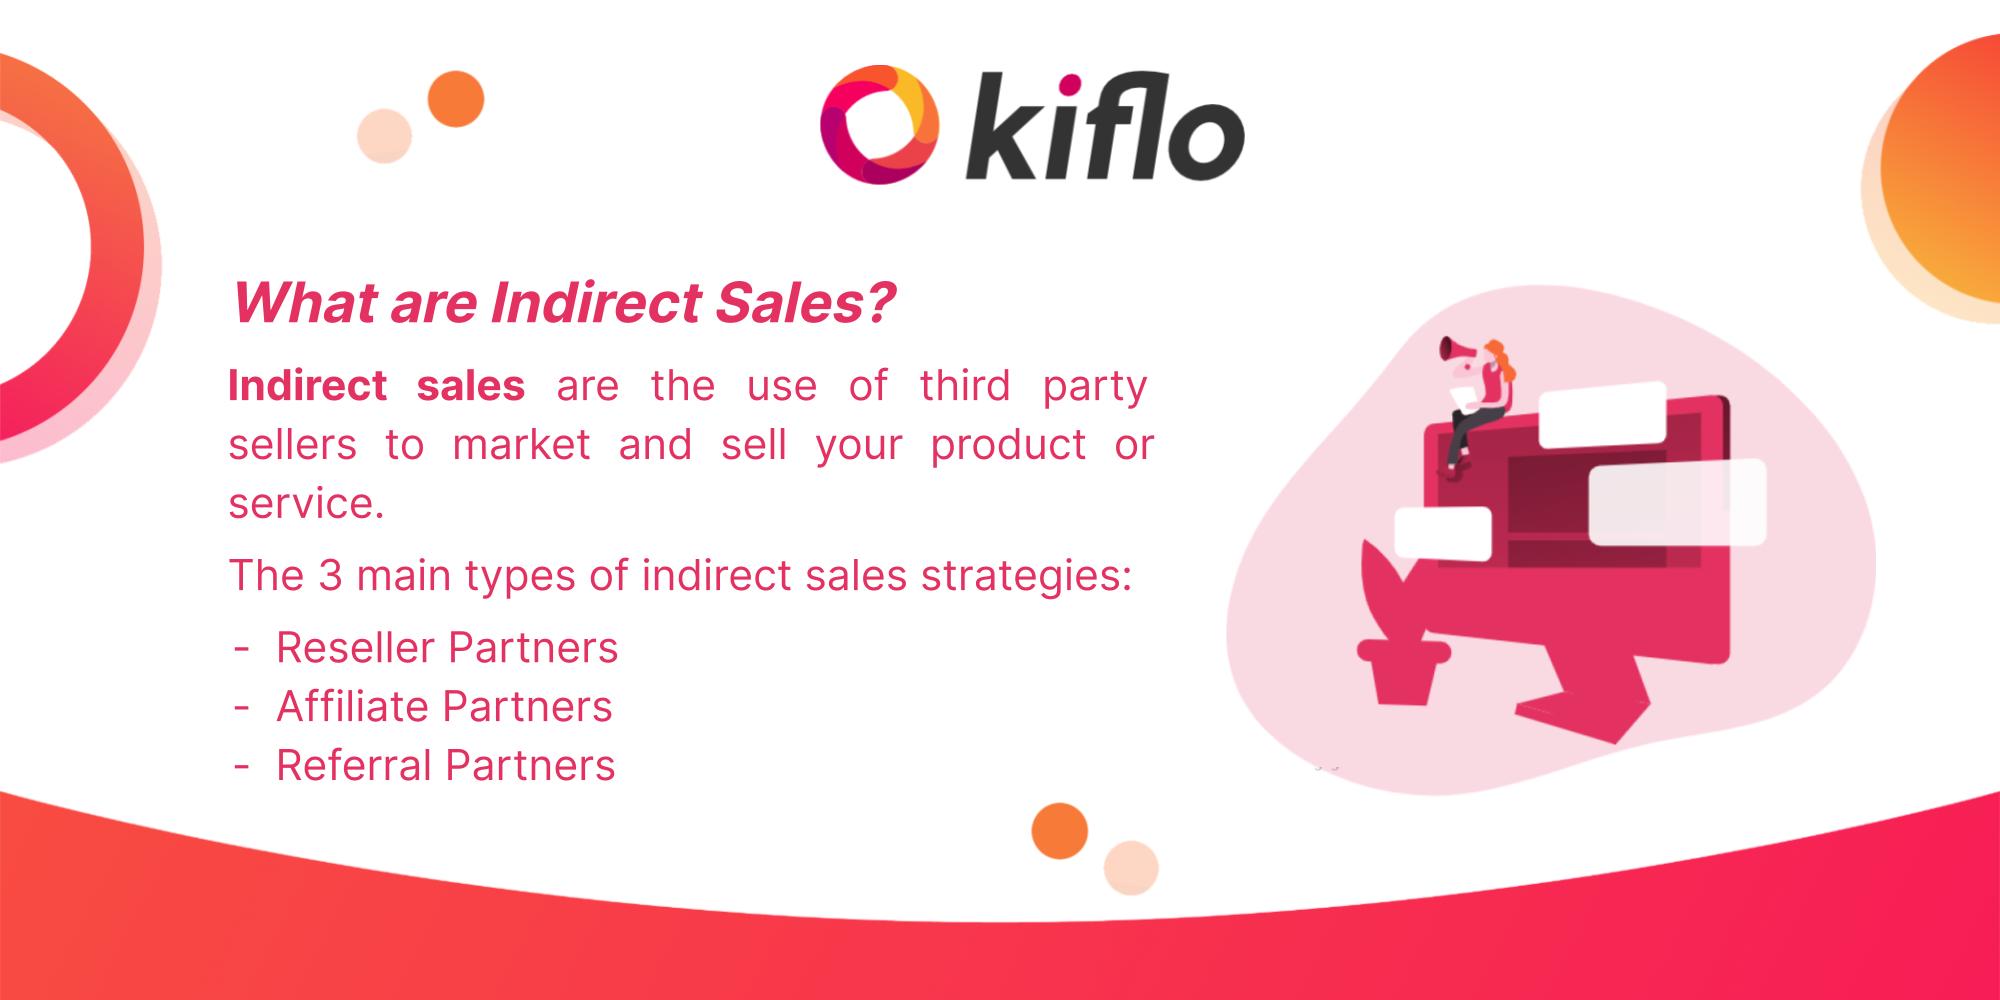 What Are Indirect Sales?